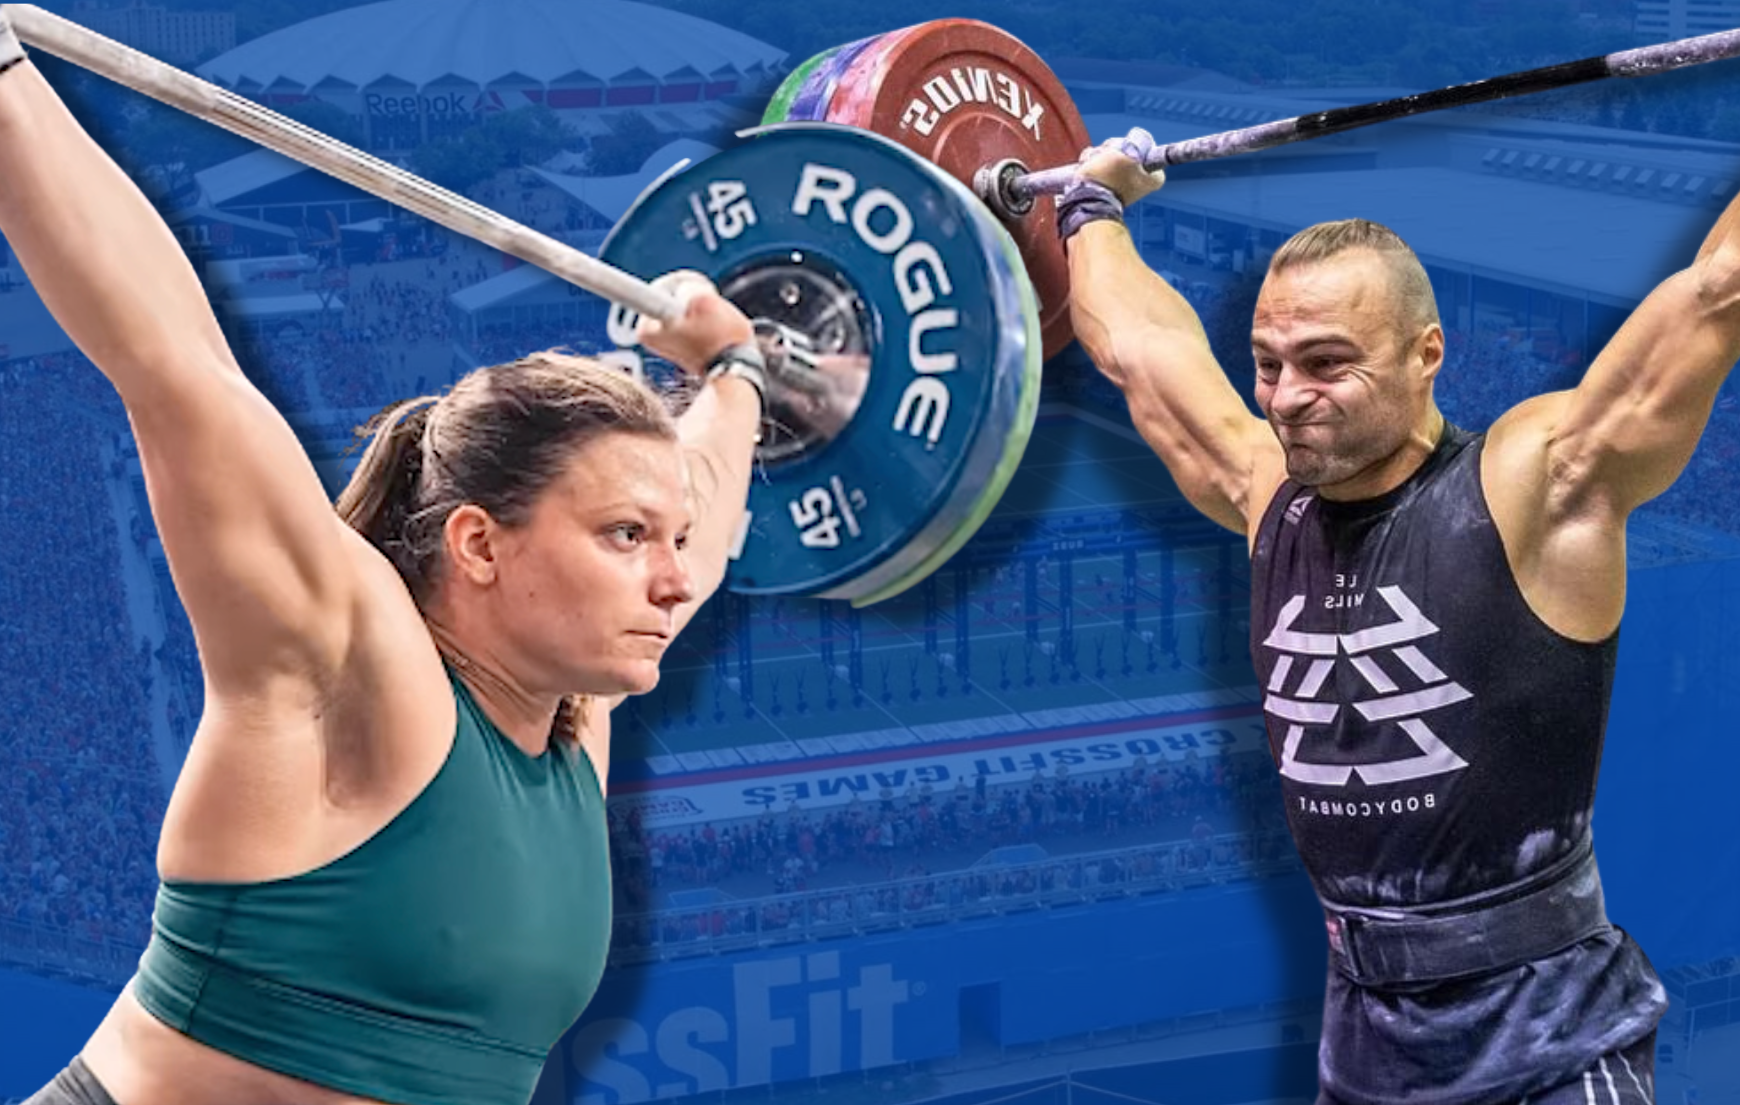 All Lift Results From “Oly Total” Event at 2023 CrossFit Games